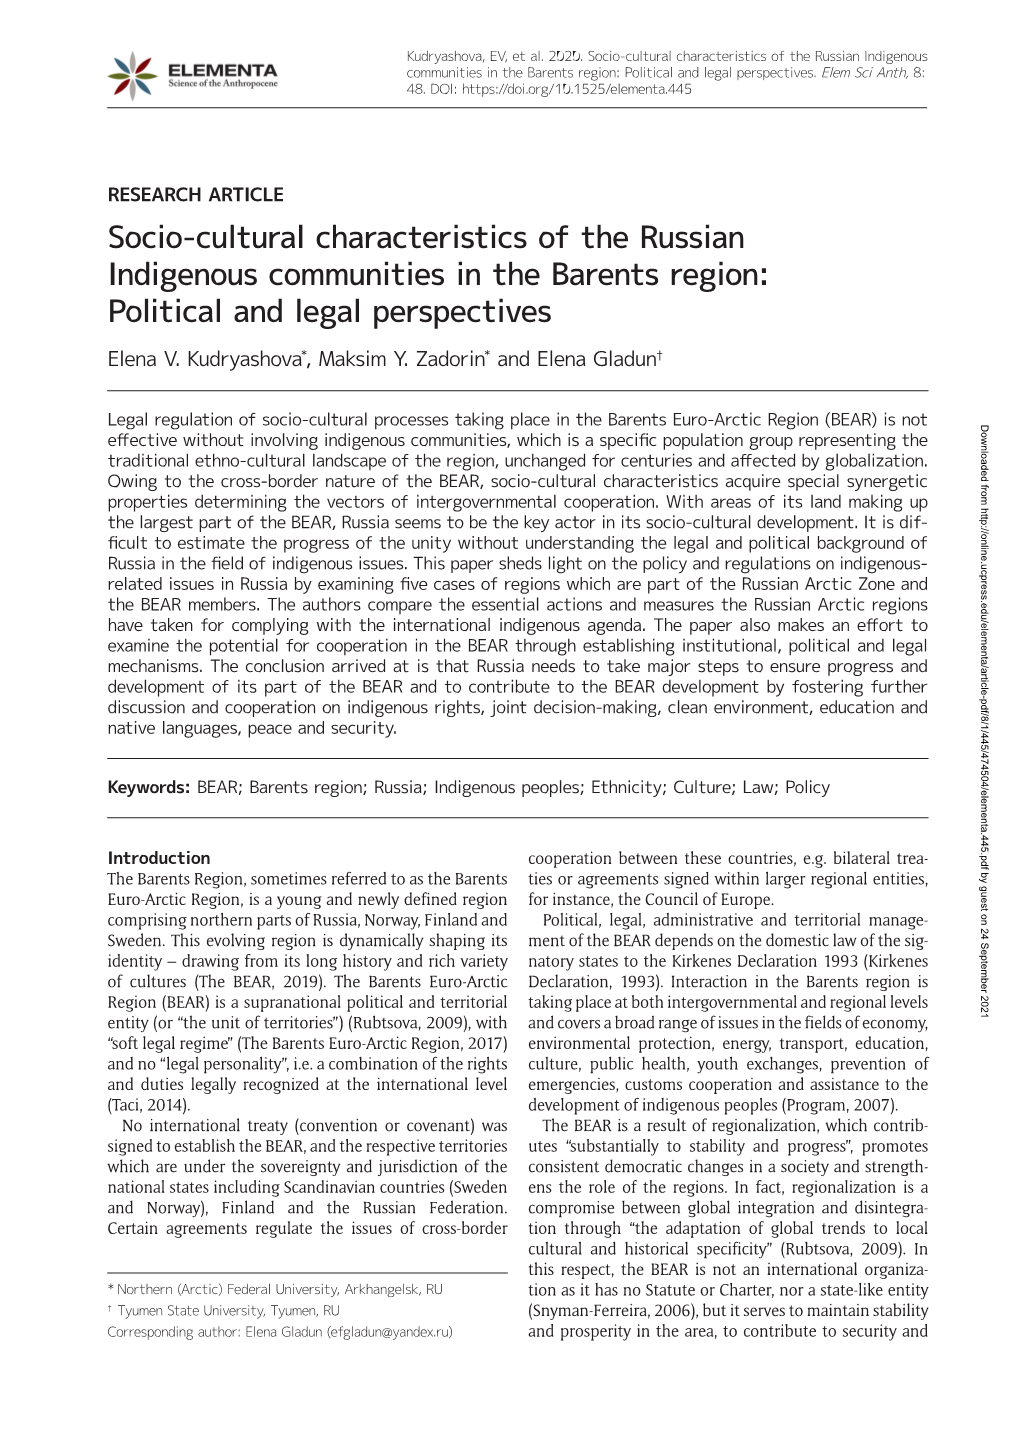 Socio-Cultural Characteristics of the Russian Indigenous Communities in the Barents Region: Political and Legal Perspectives